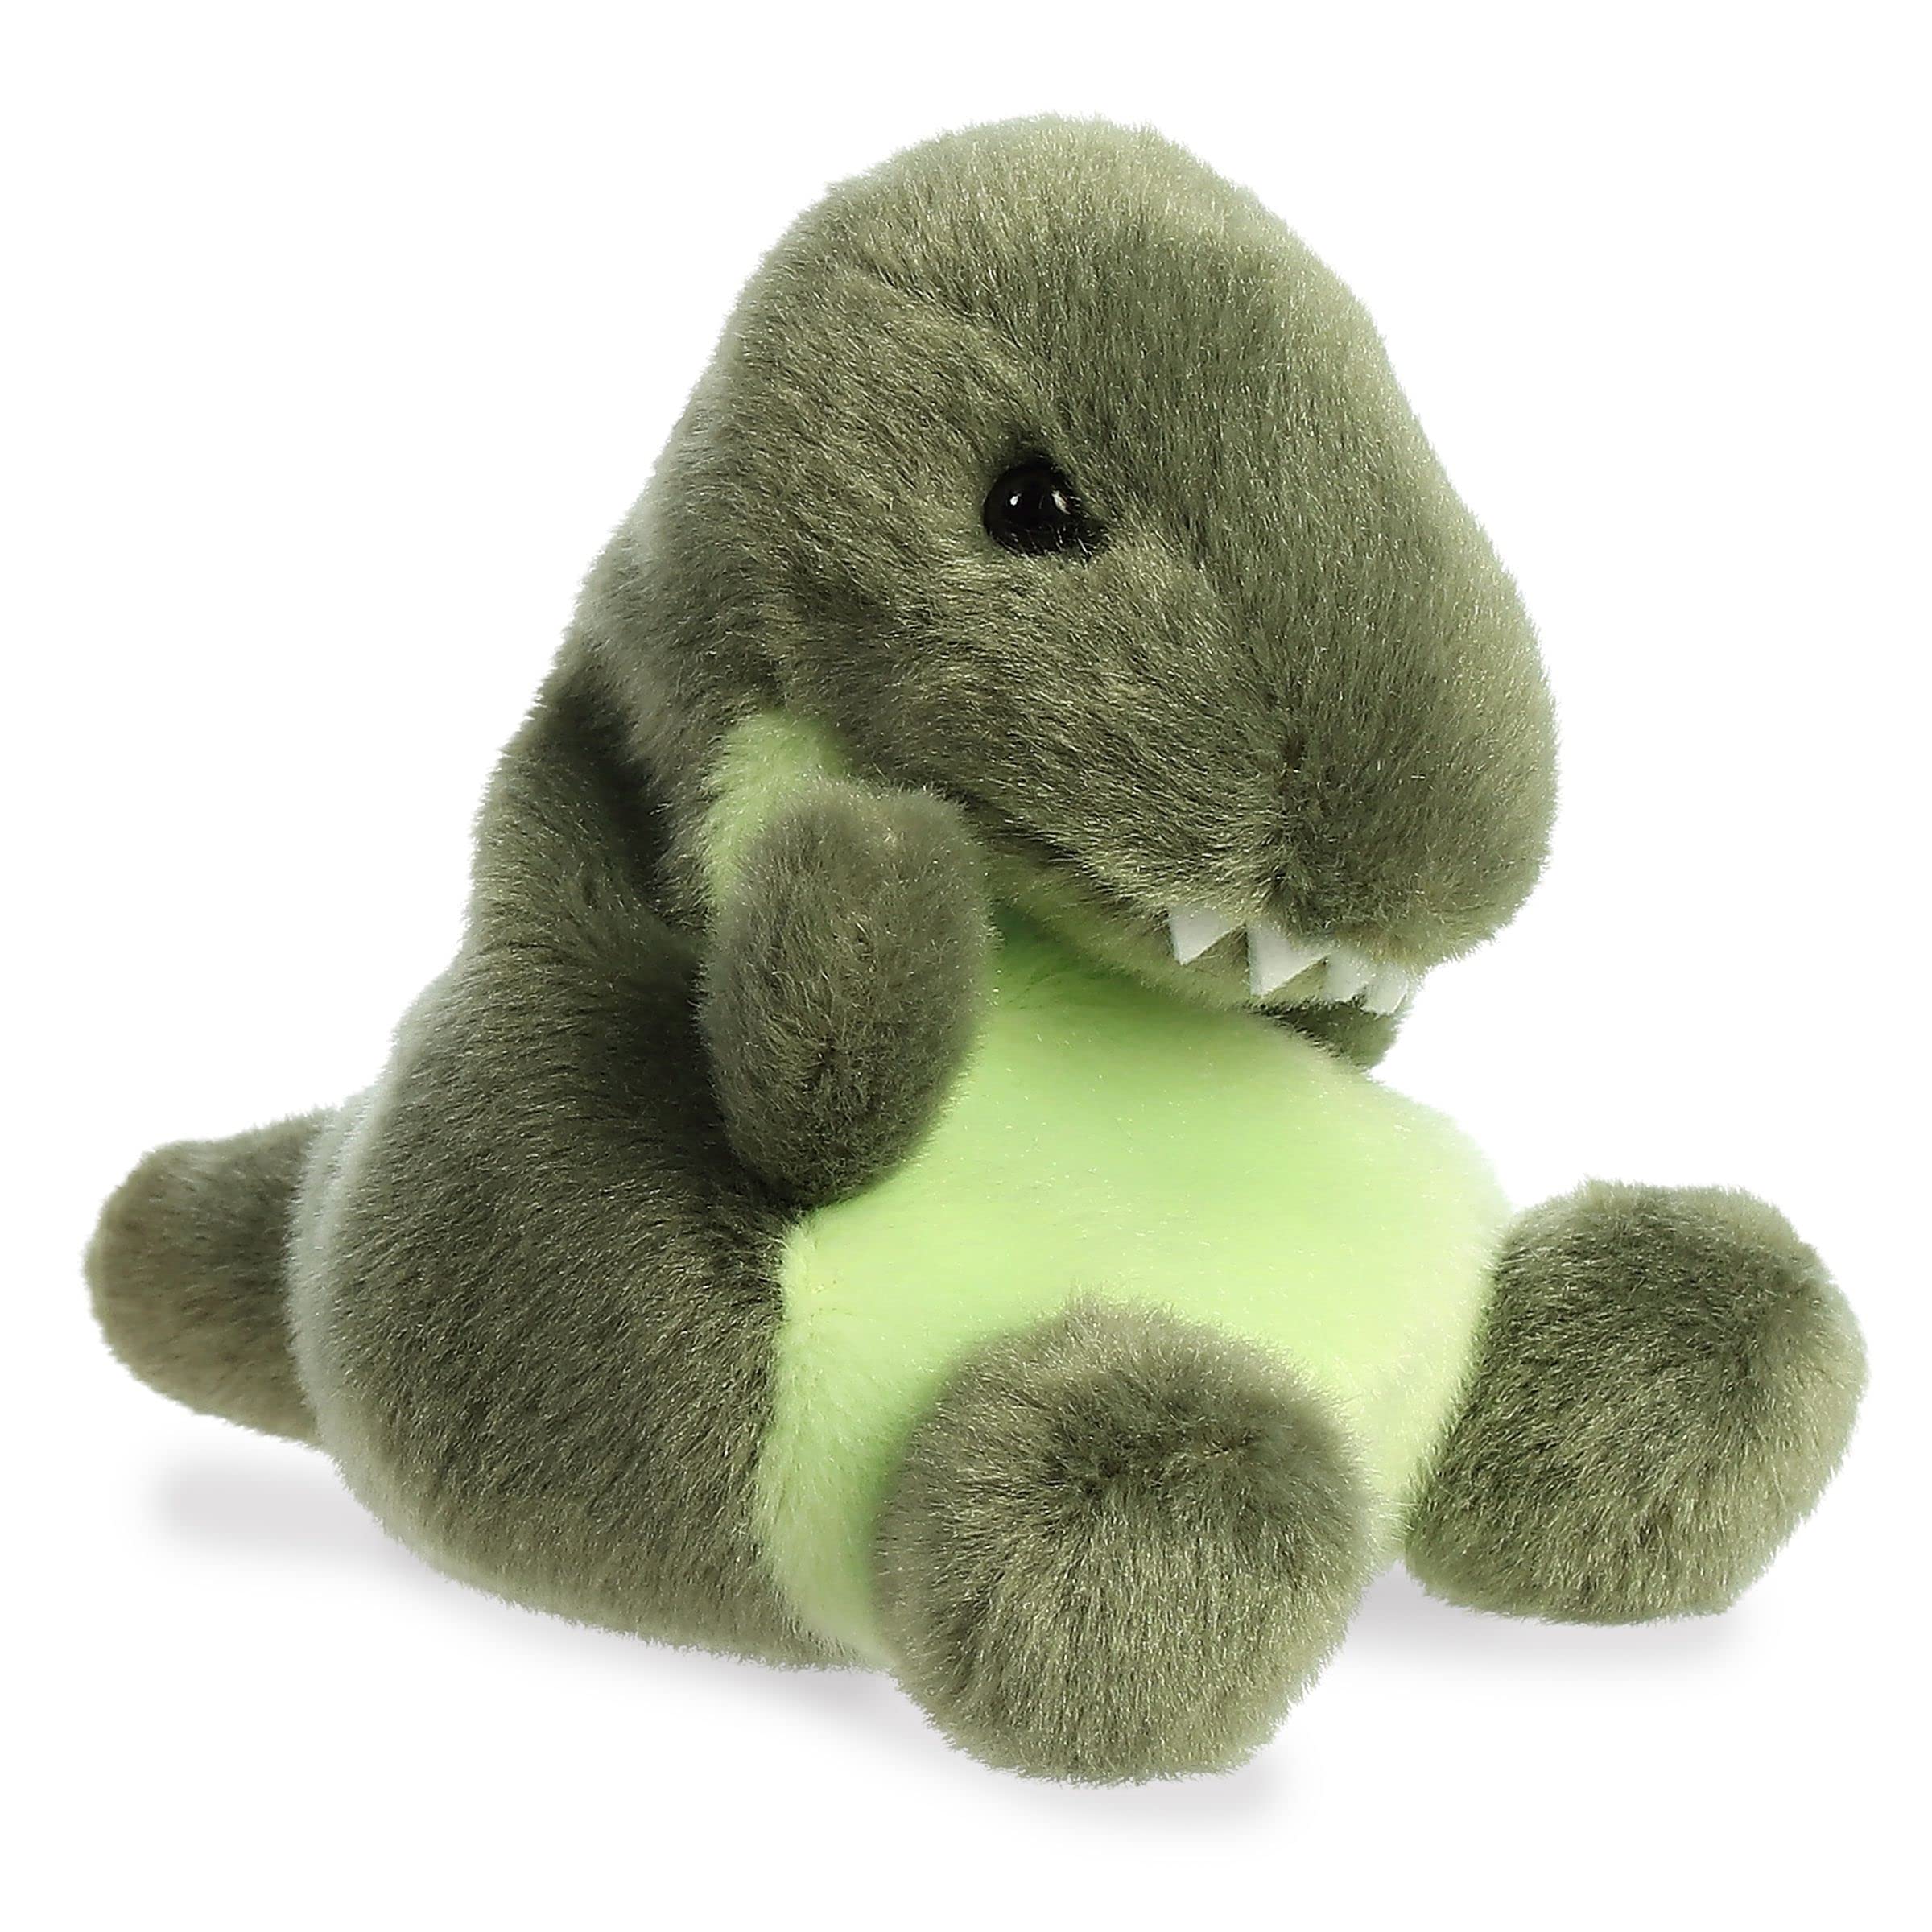 Aurora® Adorable Palm Pals™ Tyranno Rex™ Stuffed Animal - Pocket-Sized Play - Collectable Fun - Green 5 Inches